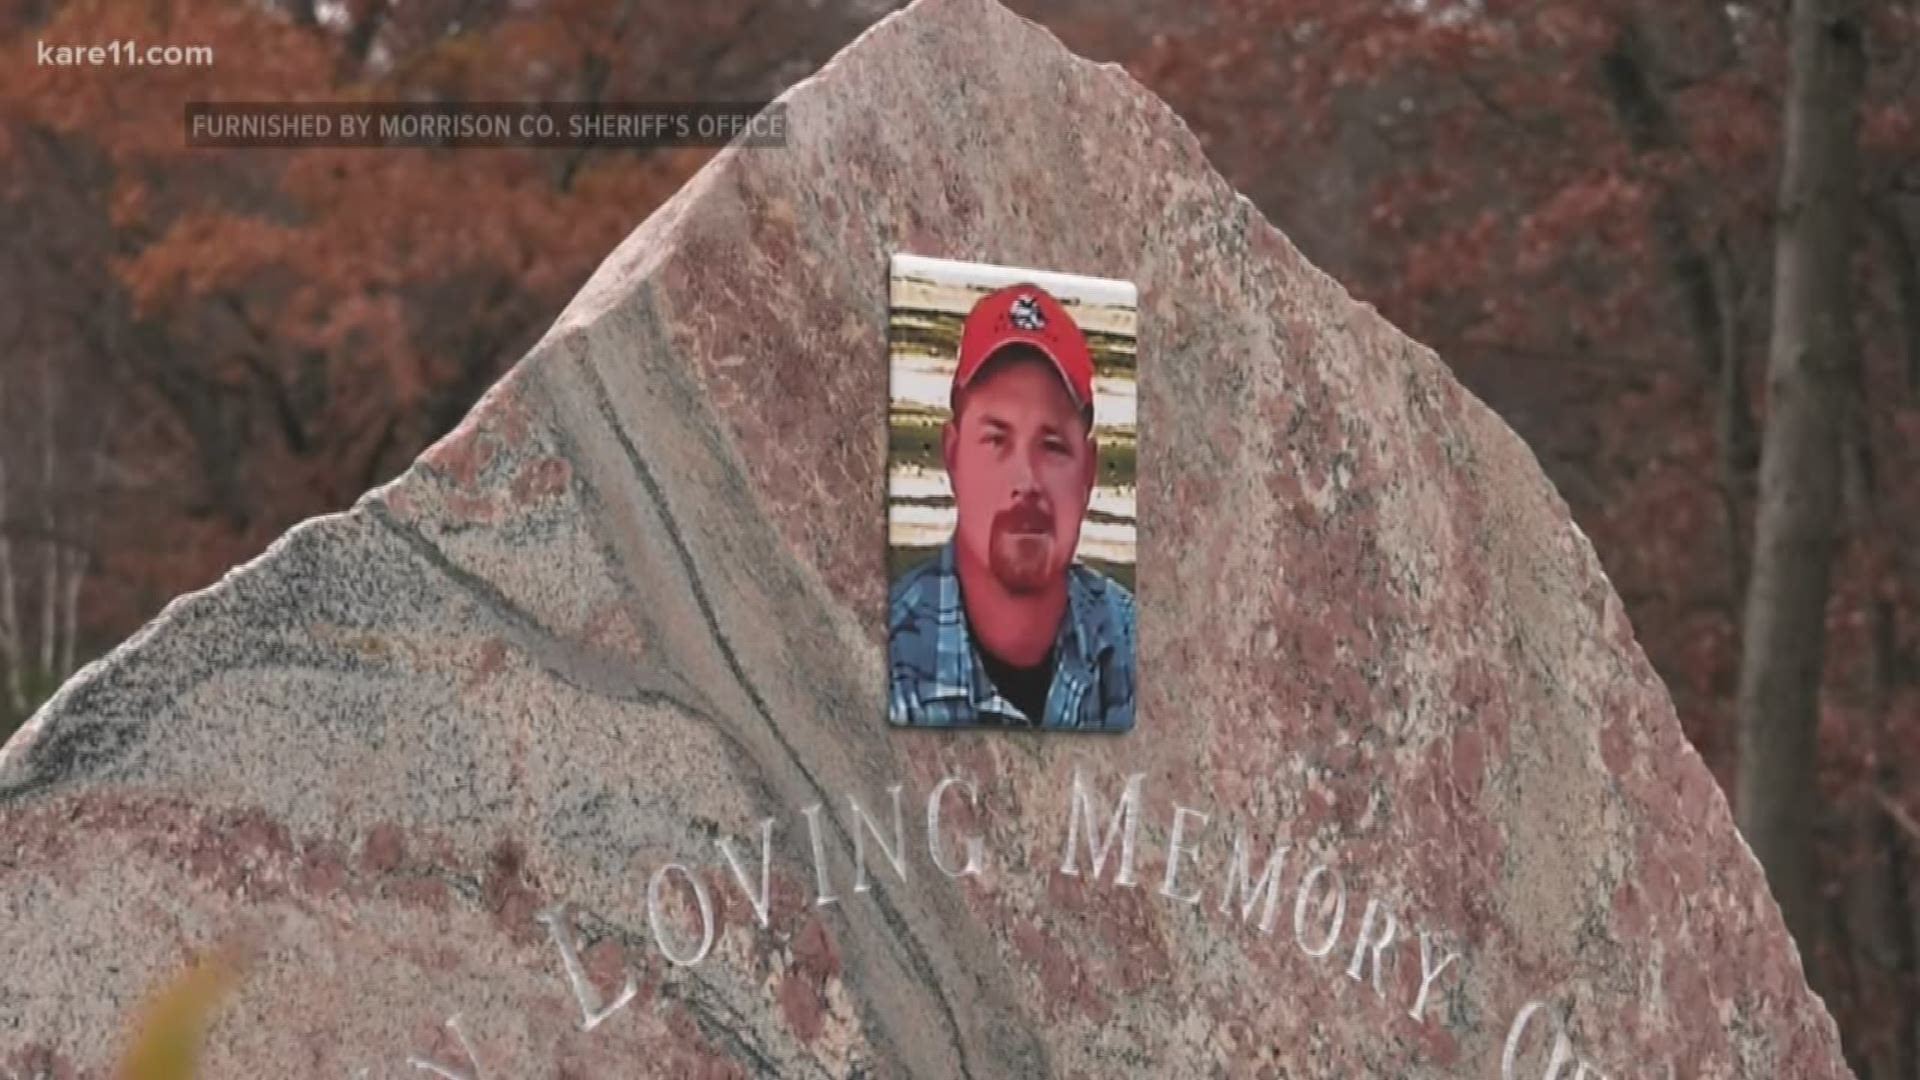 Terry Brisk was killed three years ago while hunting. His killer has never been found.